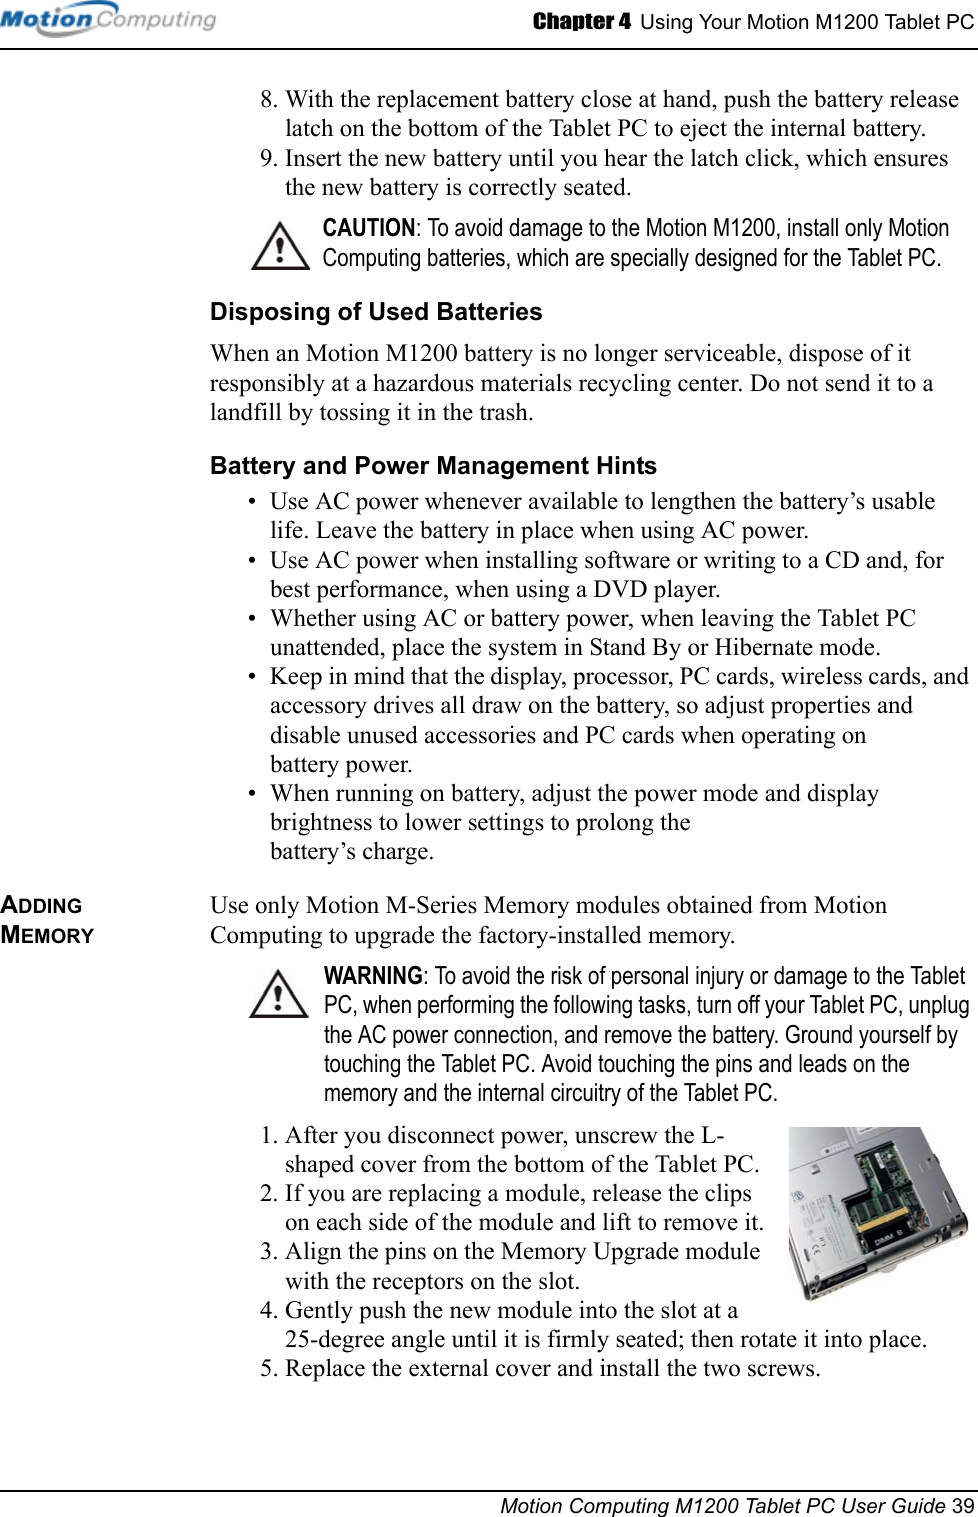 Chapter 4  Using Your Motion M1200 Tablet PCMotion Computing M1200 Tablet PC User Guide 398. With the replacement battery close at hand, push the battery release latch on the bottom of the Tablet PC to eject the internal battery.9. Insert the new battery until you hear the latch click, which ensures the new battery is correctly seated.CAUTION: To avoid damage to the Motion M1200, install only Motion Computing batteries, which are specially designed for the Tablet PC. Disposing of Used BatteriesWhen an Motion M1200 battery is no longer serviceable, dispose of it responsibly at a hazardous materials recycling center. Do not send it to a landfill by tossing it in the trash.Battery and Power Management Hints• Use AC power whenever available to lengthen the battery’s usable life. Leave the battery in place when using AC power.• Use AC power when installing software or writing to a CD and, for best performance, when using a DVD player.• Whether using AC or battery power, when leaving the Tablet PC unattended, place the system in Stand By or Hibernate mode.• Keep in mind that the display, processor, PC cards, wireless cards, and accessory drives all draw on the battery, so adjust properties and disable unused accessories and PC cards when operating on battery power. • When running on battery, adjust the power mode and display brightness to lower settings to prolong the battery’s charge. ADDING MEMORYUse only Motion M-Series Memory modules obtained from Motion Computing to upgrade the factory-installed memory.WARNING: To avoid the risk of personal injury or damage to the Tablet PC, when performing the following tasks, turn off your Tablet PC, unplug the AC power connection, and remove the battery. Ground yourself by touching the Tablet PC. Avoid touching the pins and leads on the memory and the internal circuitry of the Tablet PC.1. After you disconnect power, unscrew the L-shaped cover from the bottom of the Tablet PC. 2. If you are replacing a module, release the clips on each side of the module and lift to remove it.3. Align the pins on the Memory Upgrade module with the receptors on the slot. 4. Gently push the new module into the slot at a 25-degree angle until it is firmly seated; then rotate it into place.5. Replace the external cover and install the two screws. 